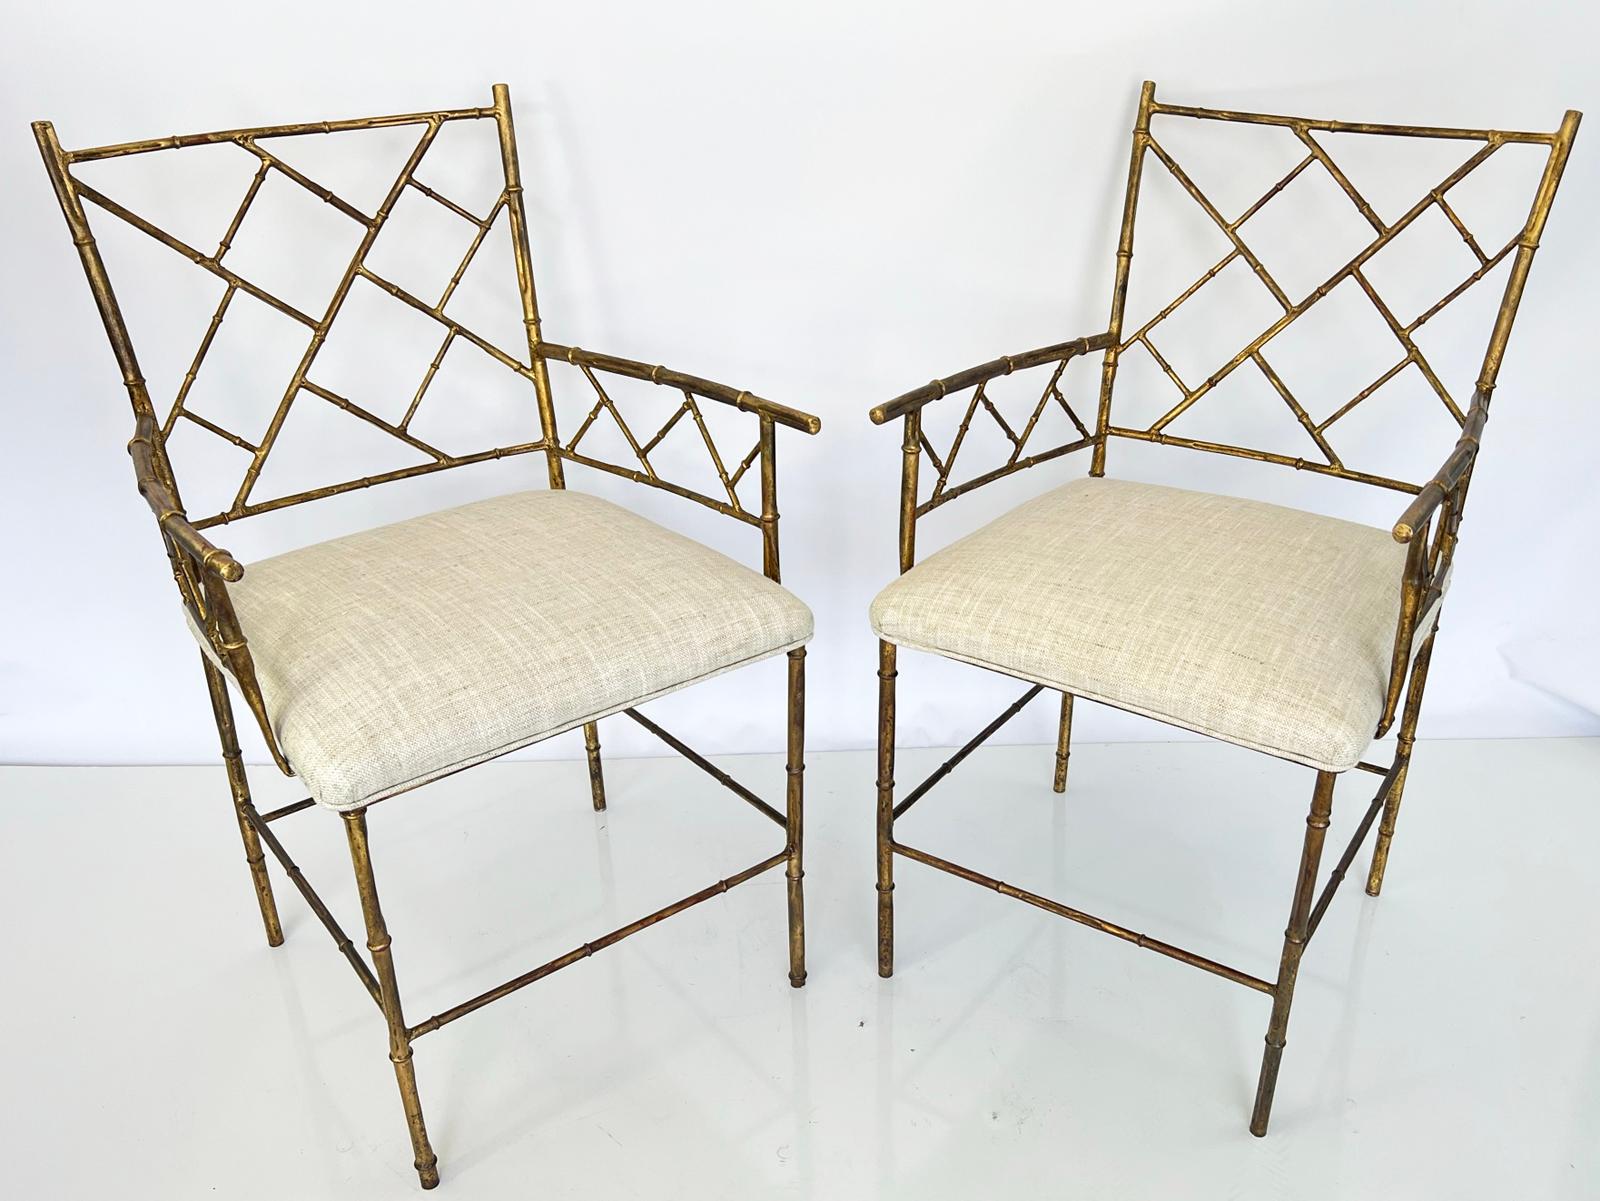 Pair of armchairs, of gilded iron, each frame fashioned as bamboo, having squared backrest and armrests inset with fretwork in Chinese Chippendale taste, the crown seat of linen on four legs, joined by a box-stretcher. 

This classic design works